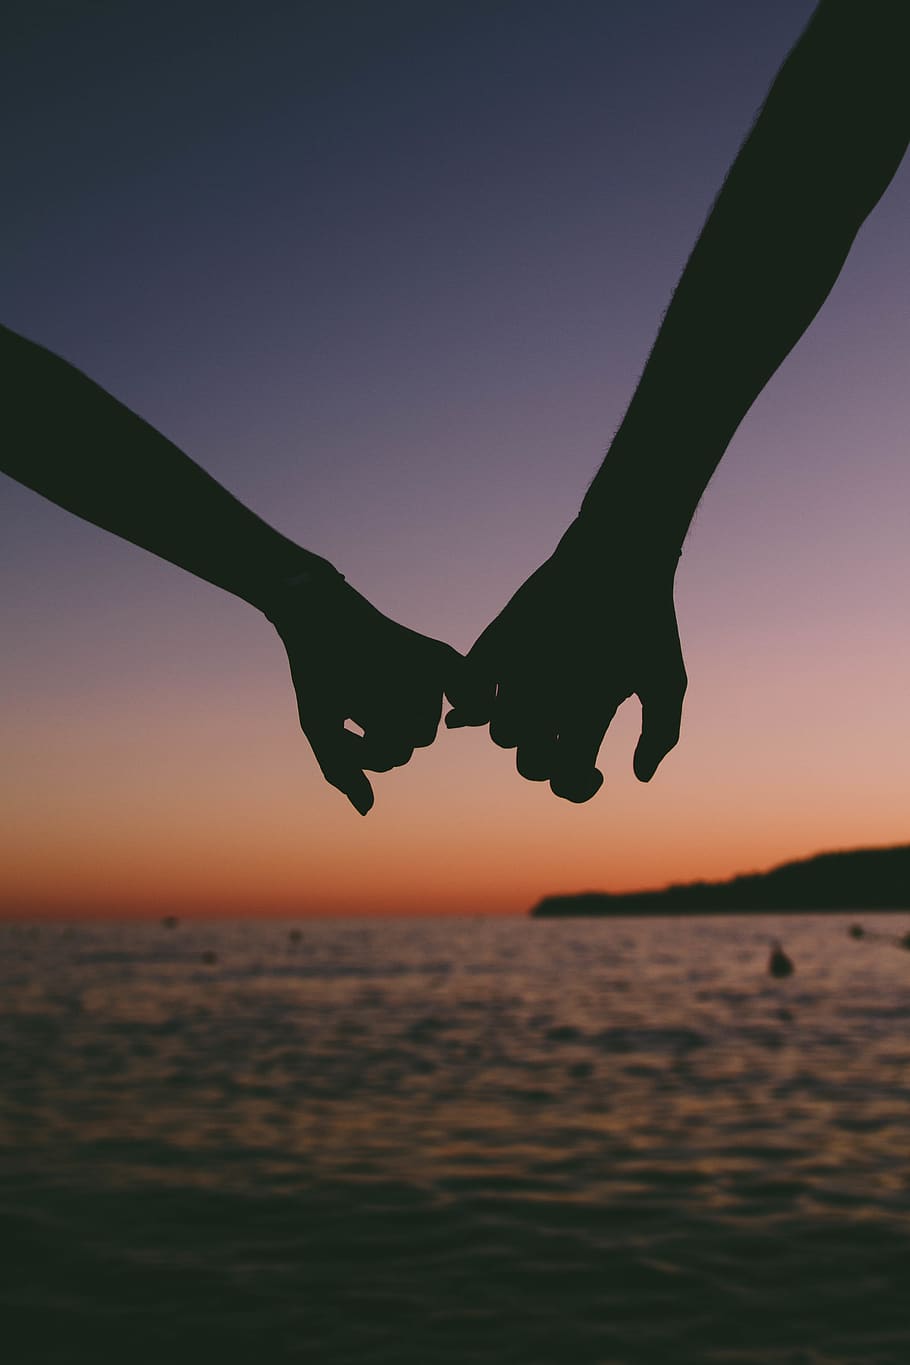 Two Person Holding Pinkies, backlit, beach, couple, dawn, evening